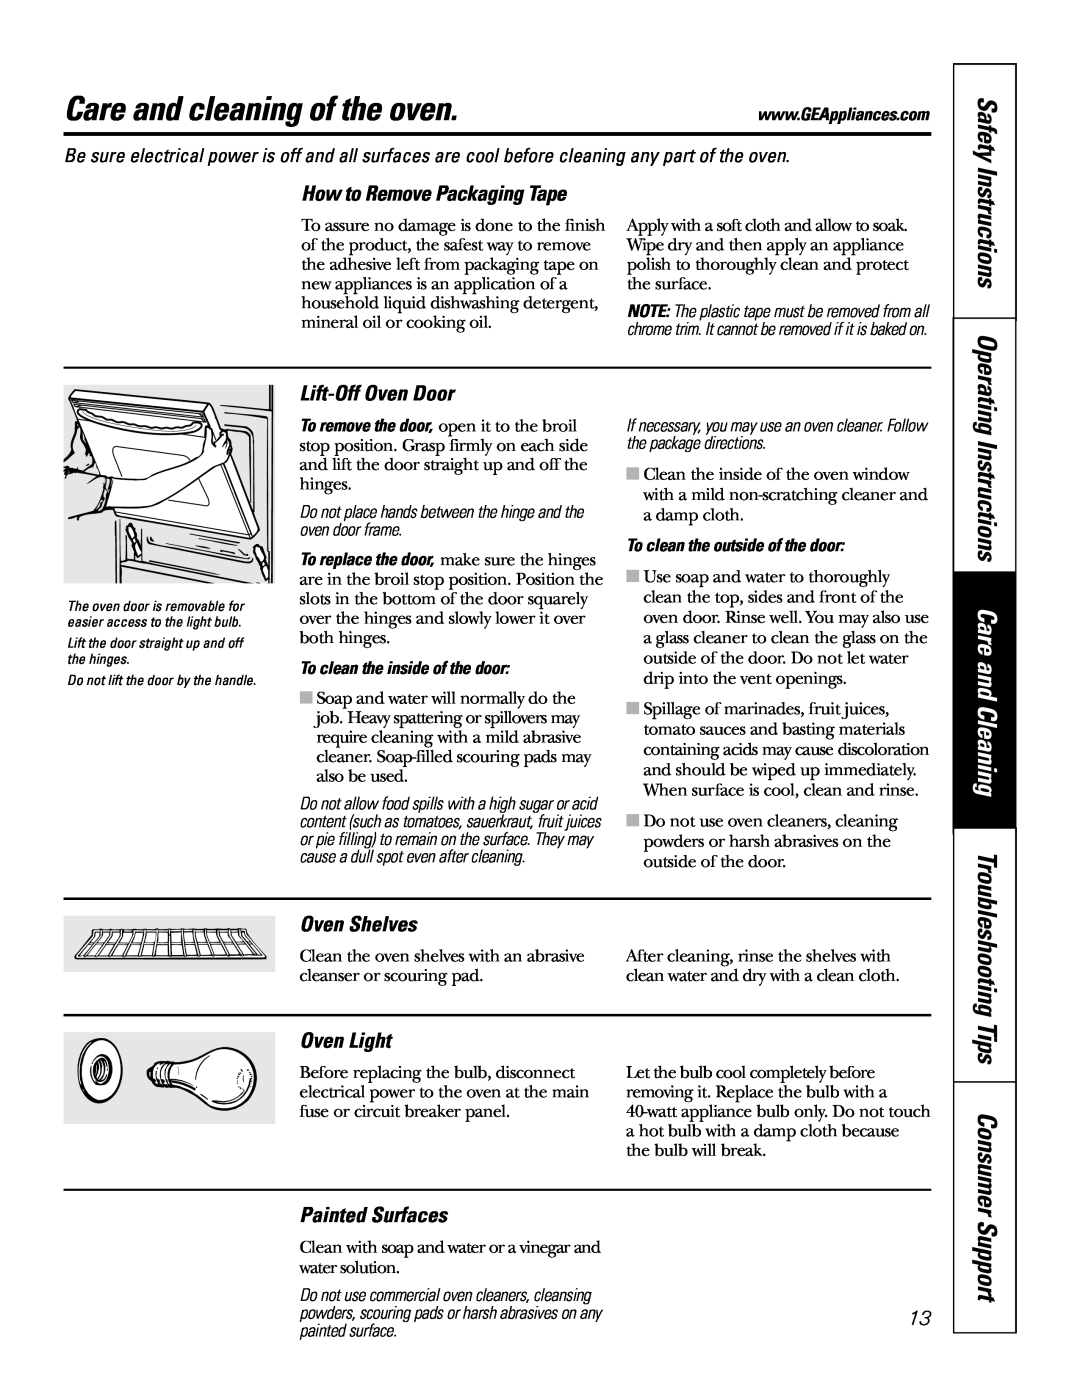 GE JRS0624 Care and cleaning of the oven, Instructions Care and Cleaning, Troubleshooting Tips Consumer Support, Safety 